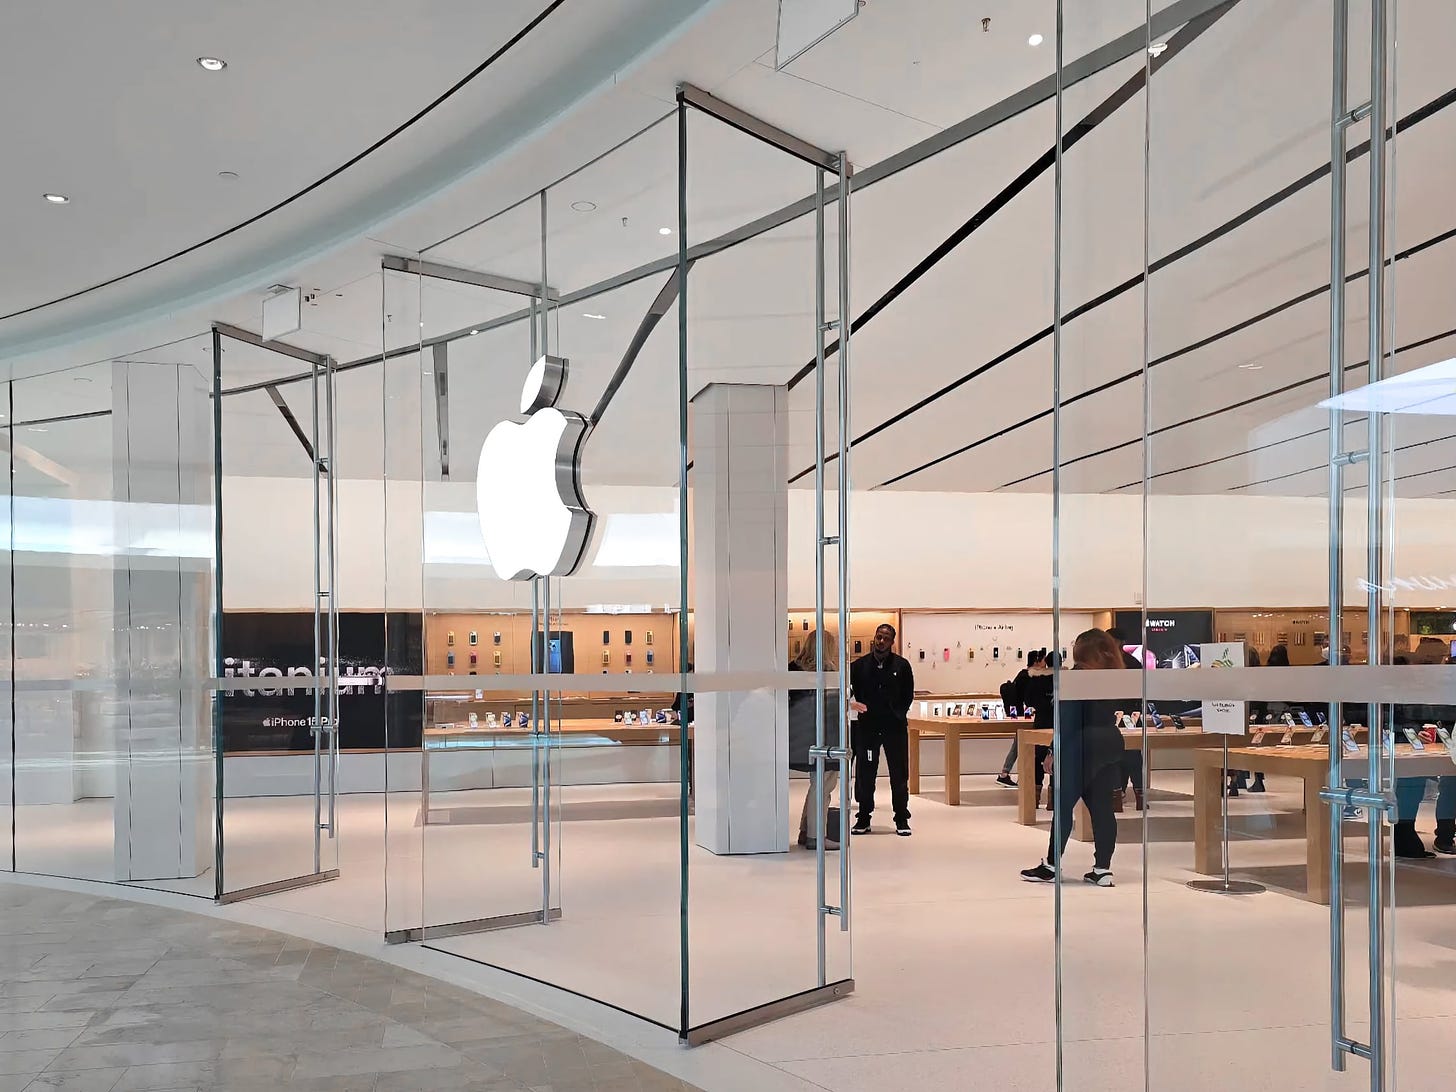 The entrance to Apple Square One. Curved glass panels are split by two sets of swing doors.